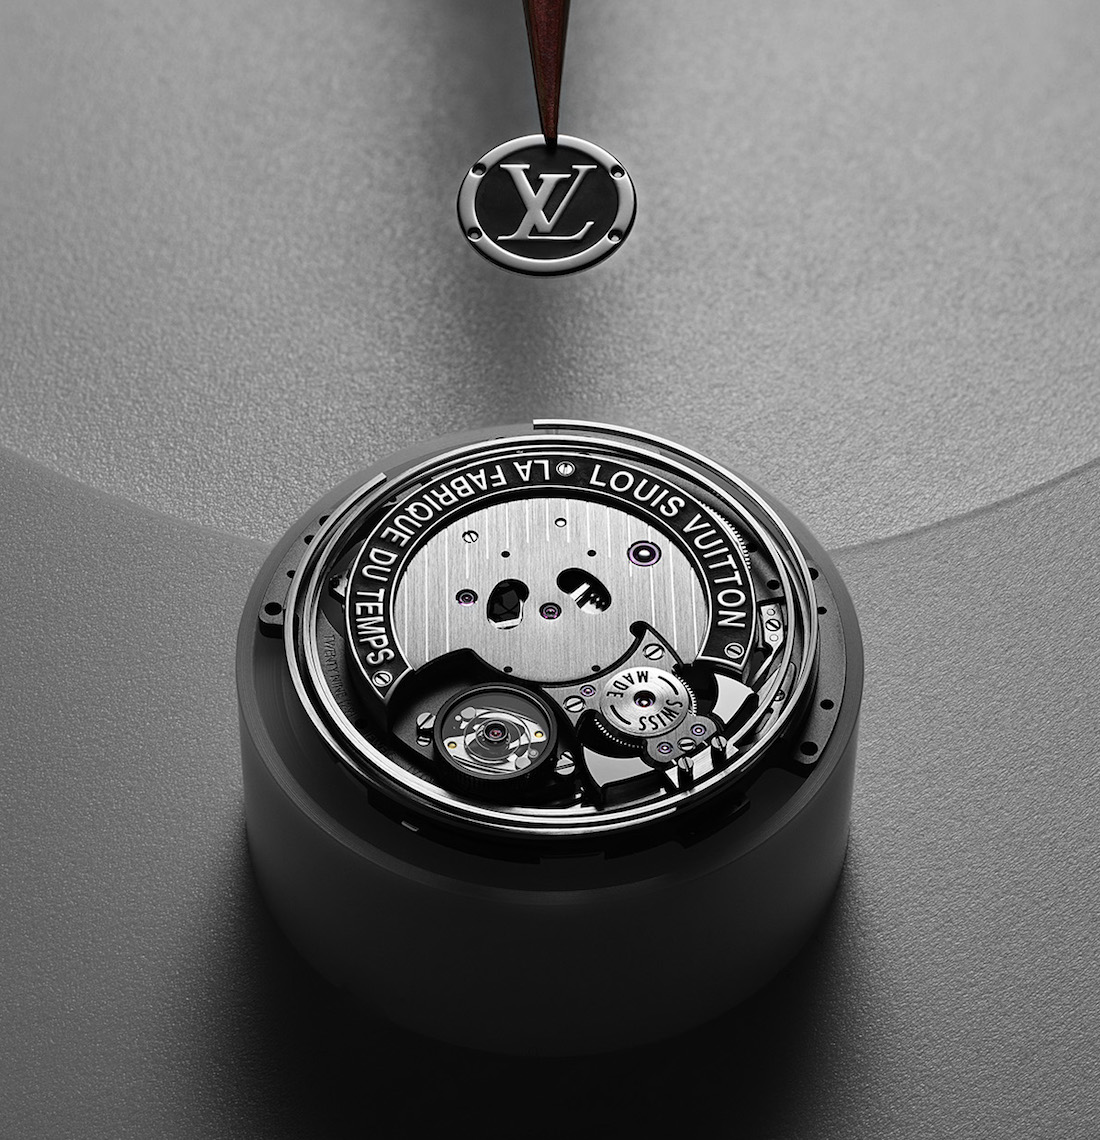 Louis-Vuitton-Voyager-Minute-Repeater-Flying-Tourbillon-Watch-Movement-Monogram-Close-Up-LV